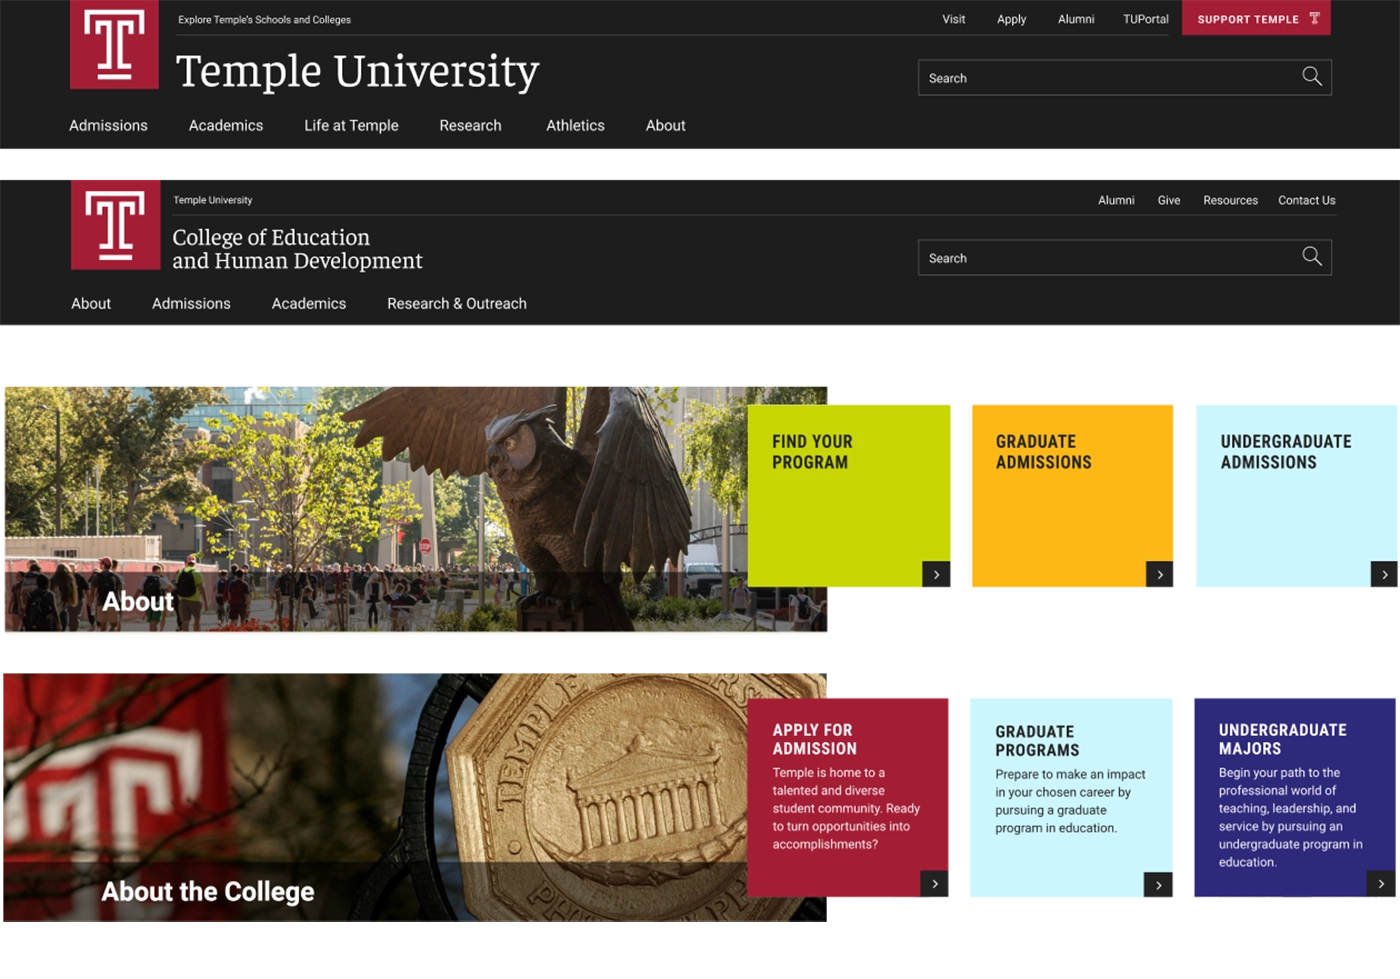 Temple University Website Header with the following main navigation options: Admissions, Academics, Life at Temple, Research, Athletics, and About. Temple University College of Education and Human Development Header webpage header with the following main navigation option: About, Admissions, Academics, Research & Outreach. The About component on the Temple University website with an image of the campus, with students and a sculpture of an owl on the left. On the right, 3 squares with the following choices: Find Your Program, Graduate Admissions, Undergraduate Admissions. The About the College component on the Temple University website with an image featuring the Temple plag and the Temple University Bronze engraving on the left. On the right, 3 squares with the following options: Apply for Admission, Graduate Programs, and Undergraduate Majors.